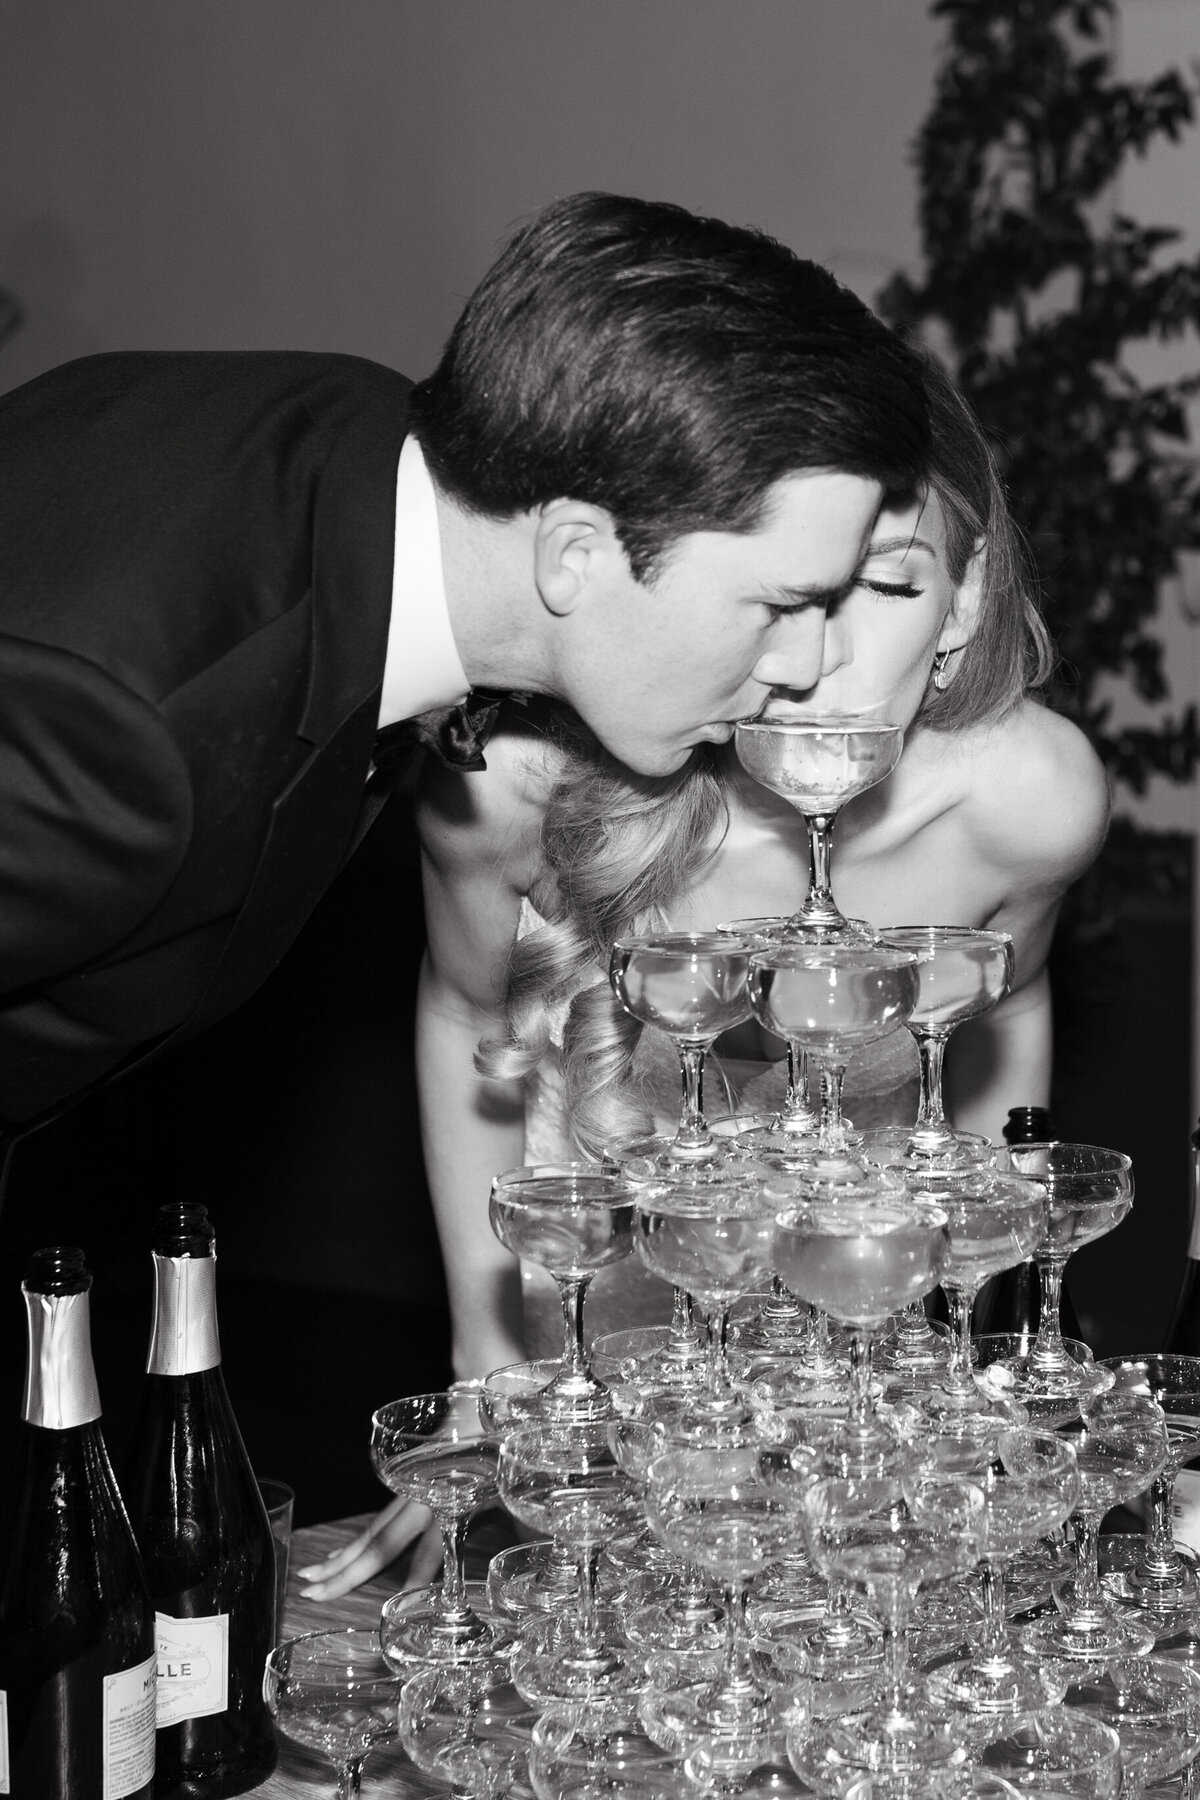 Bride and groom leaning over and sipping from champagne tower at wedding reception